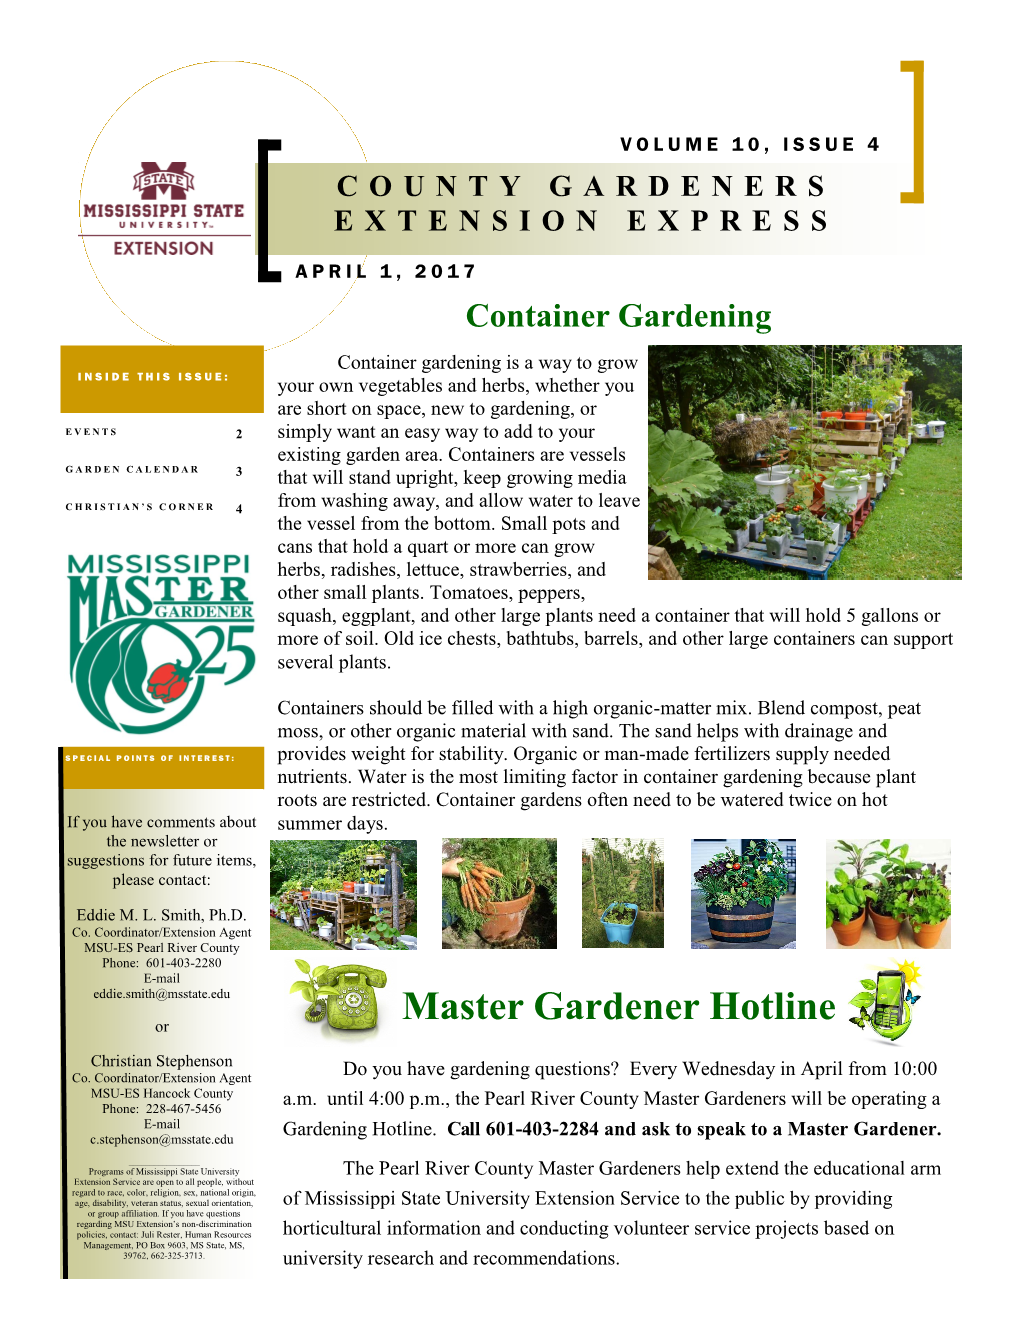 County Gardeners Extension Express April 1, 2017